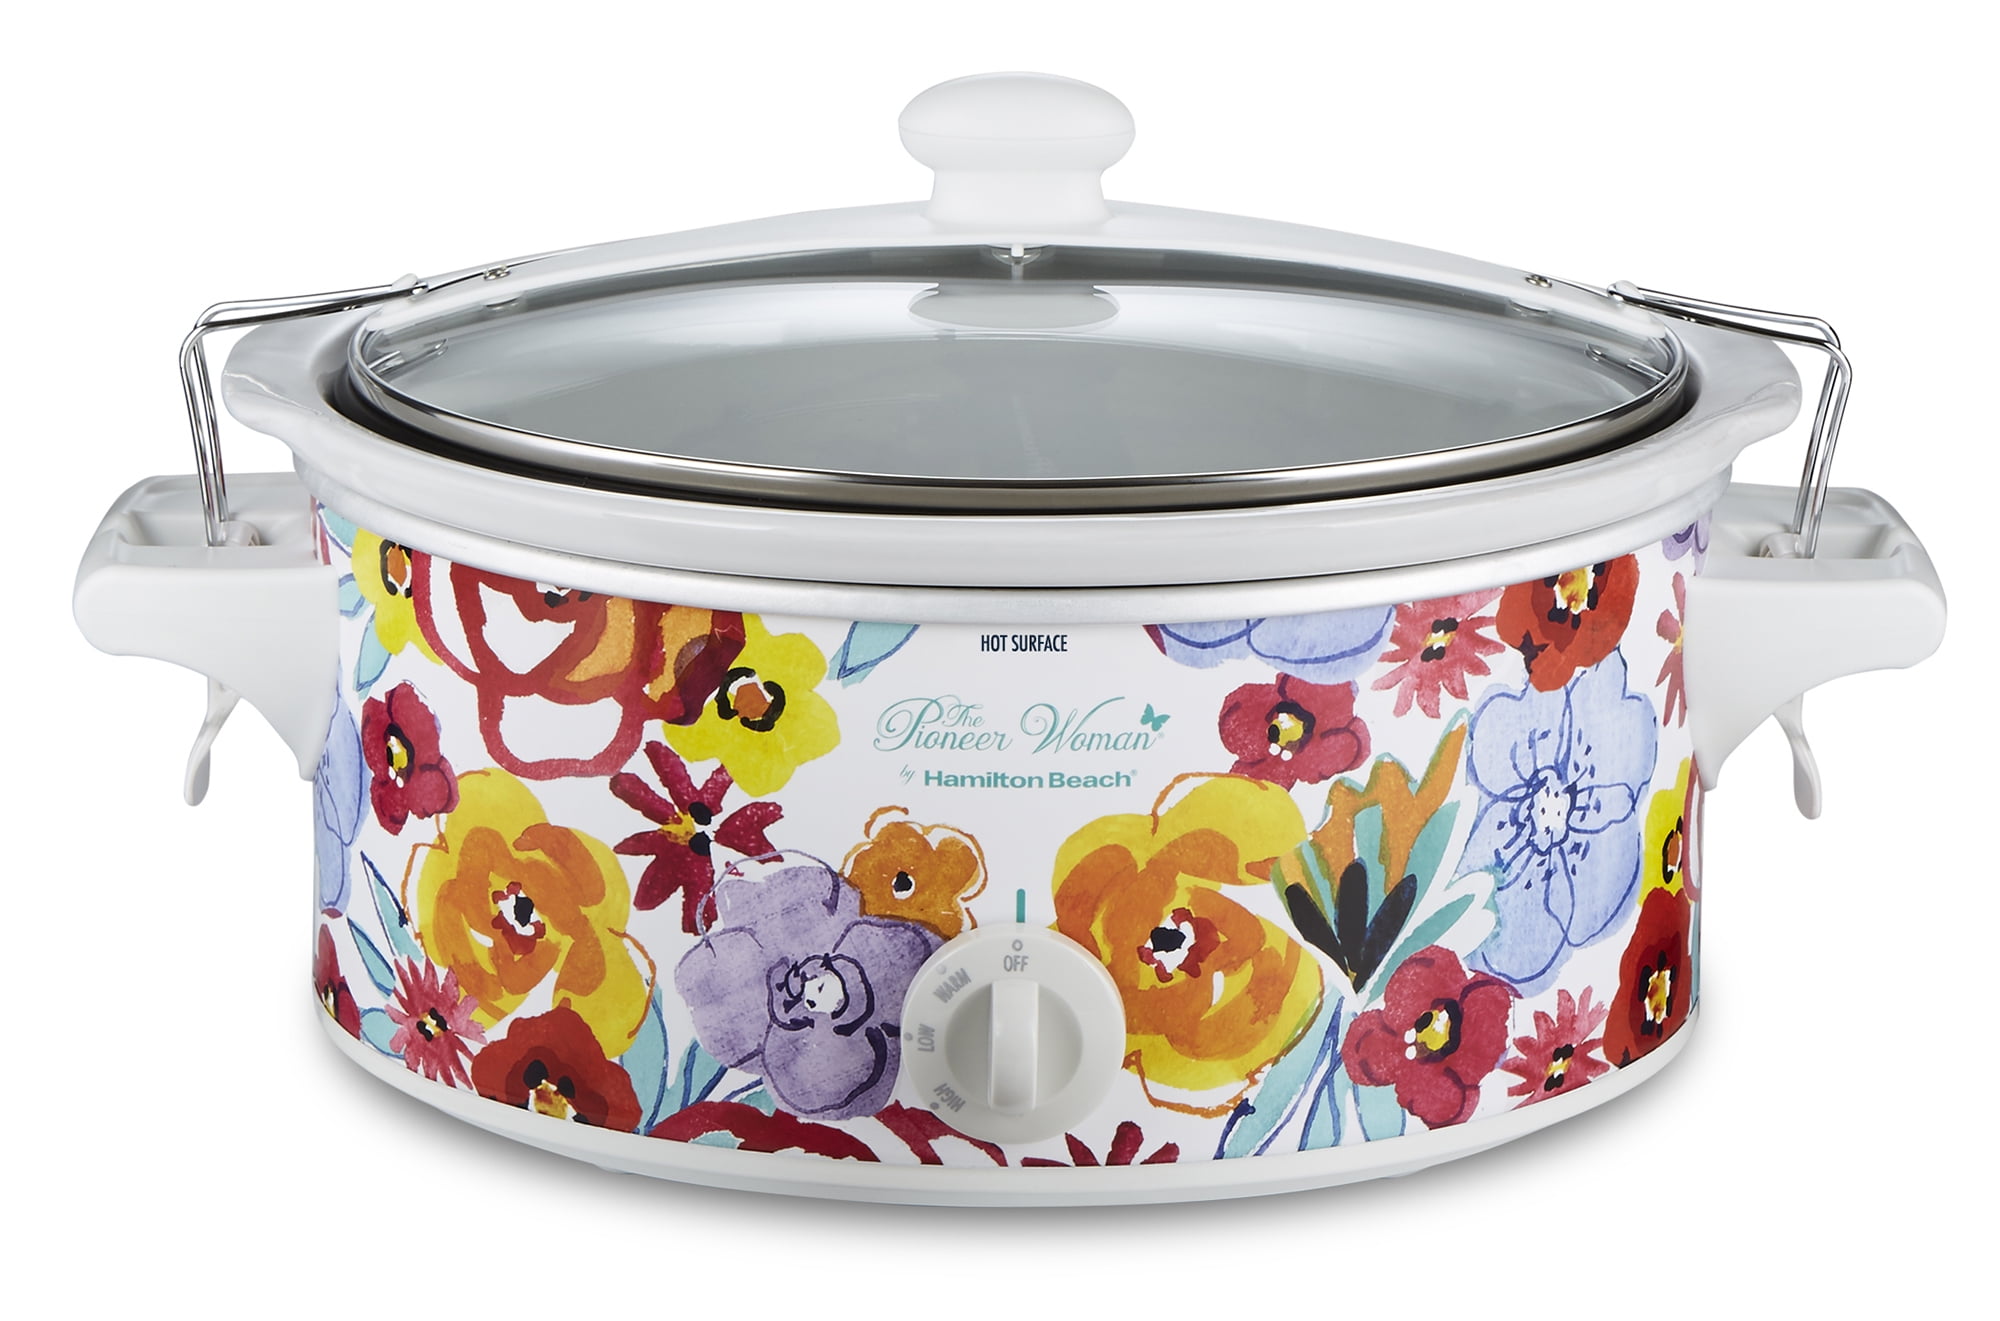 The Pioneer Woman Country Garden 6-Quart Portable Slow Cooker 